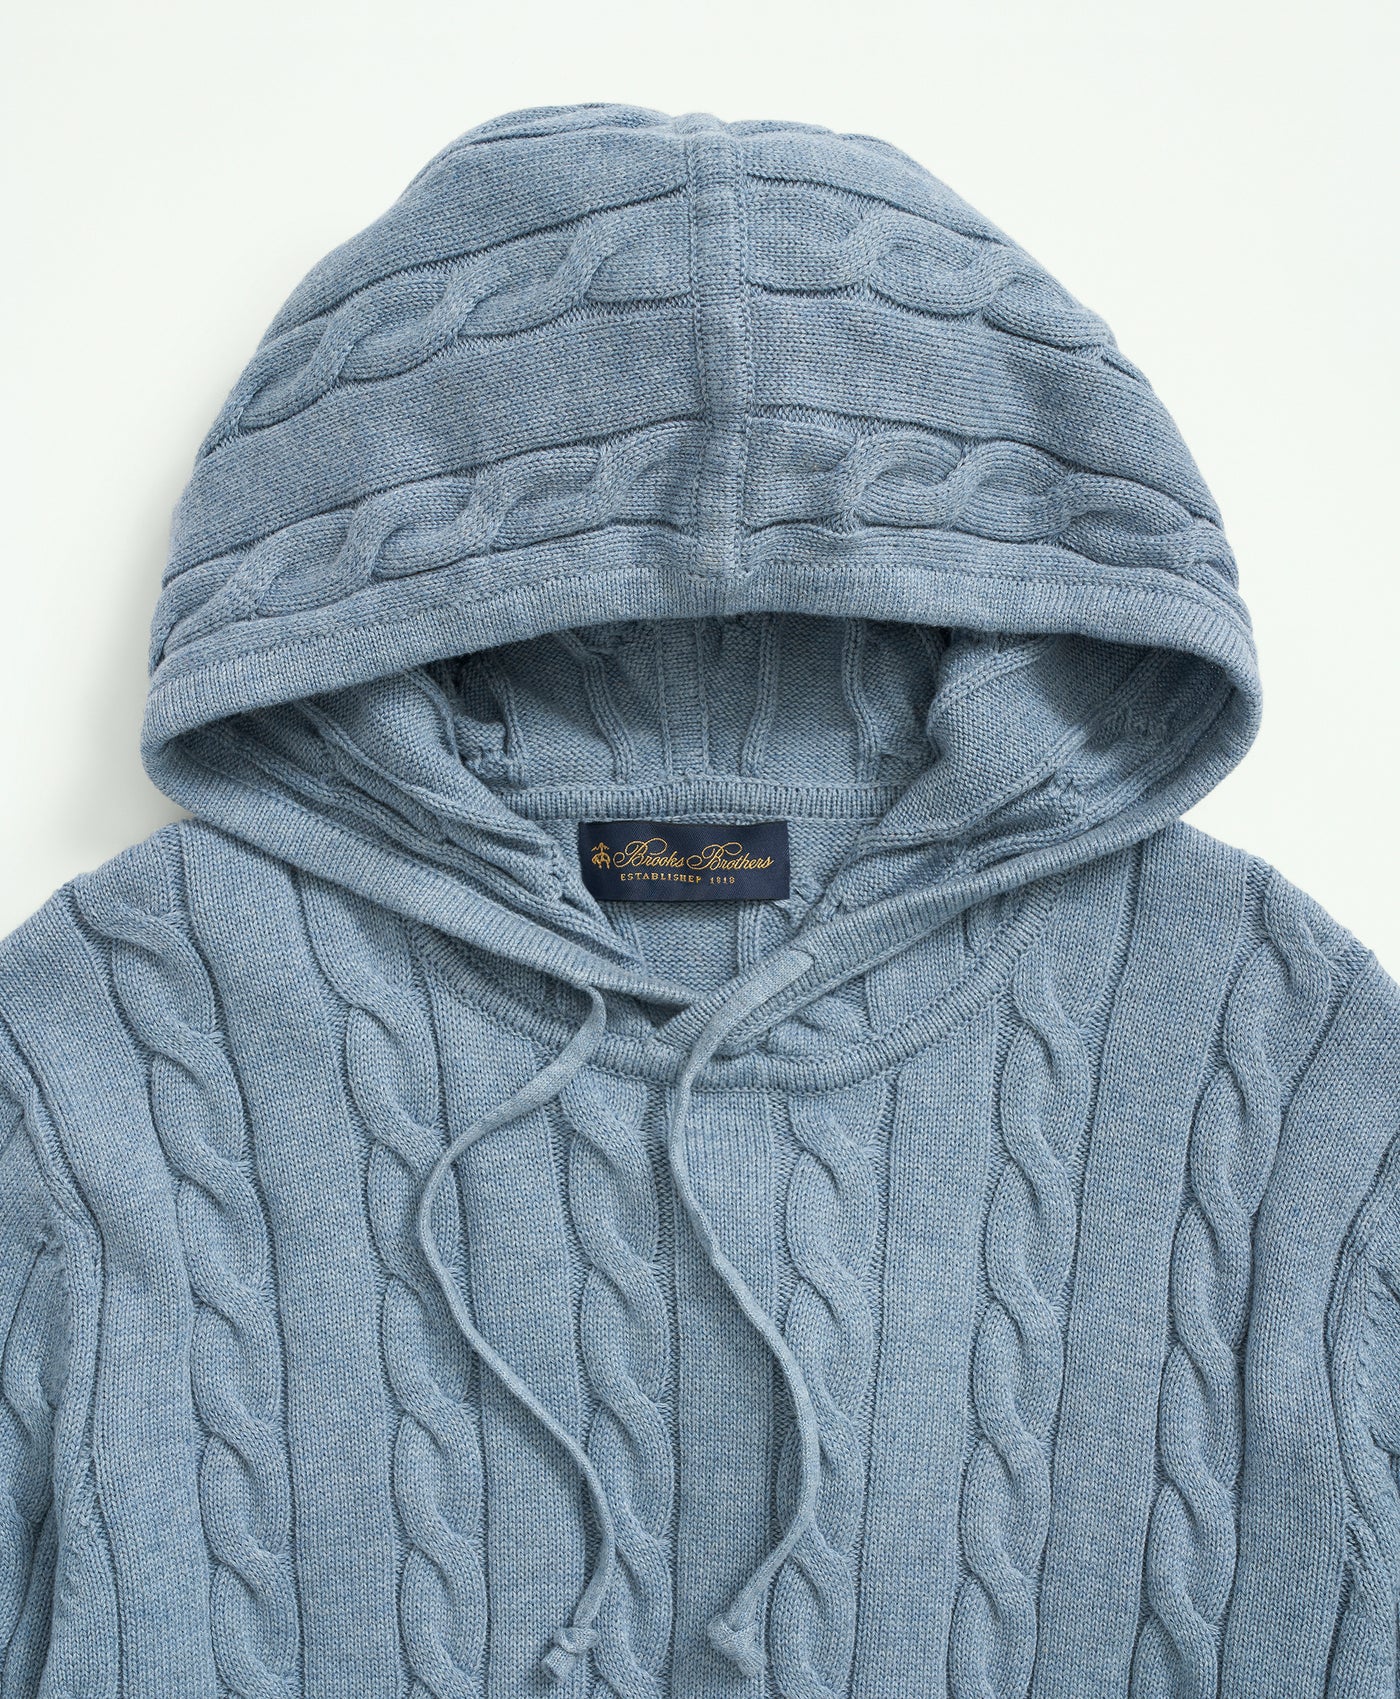 Cable-Knit Hoodie - Brooks Brothers Canada